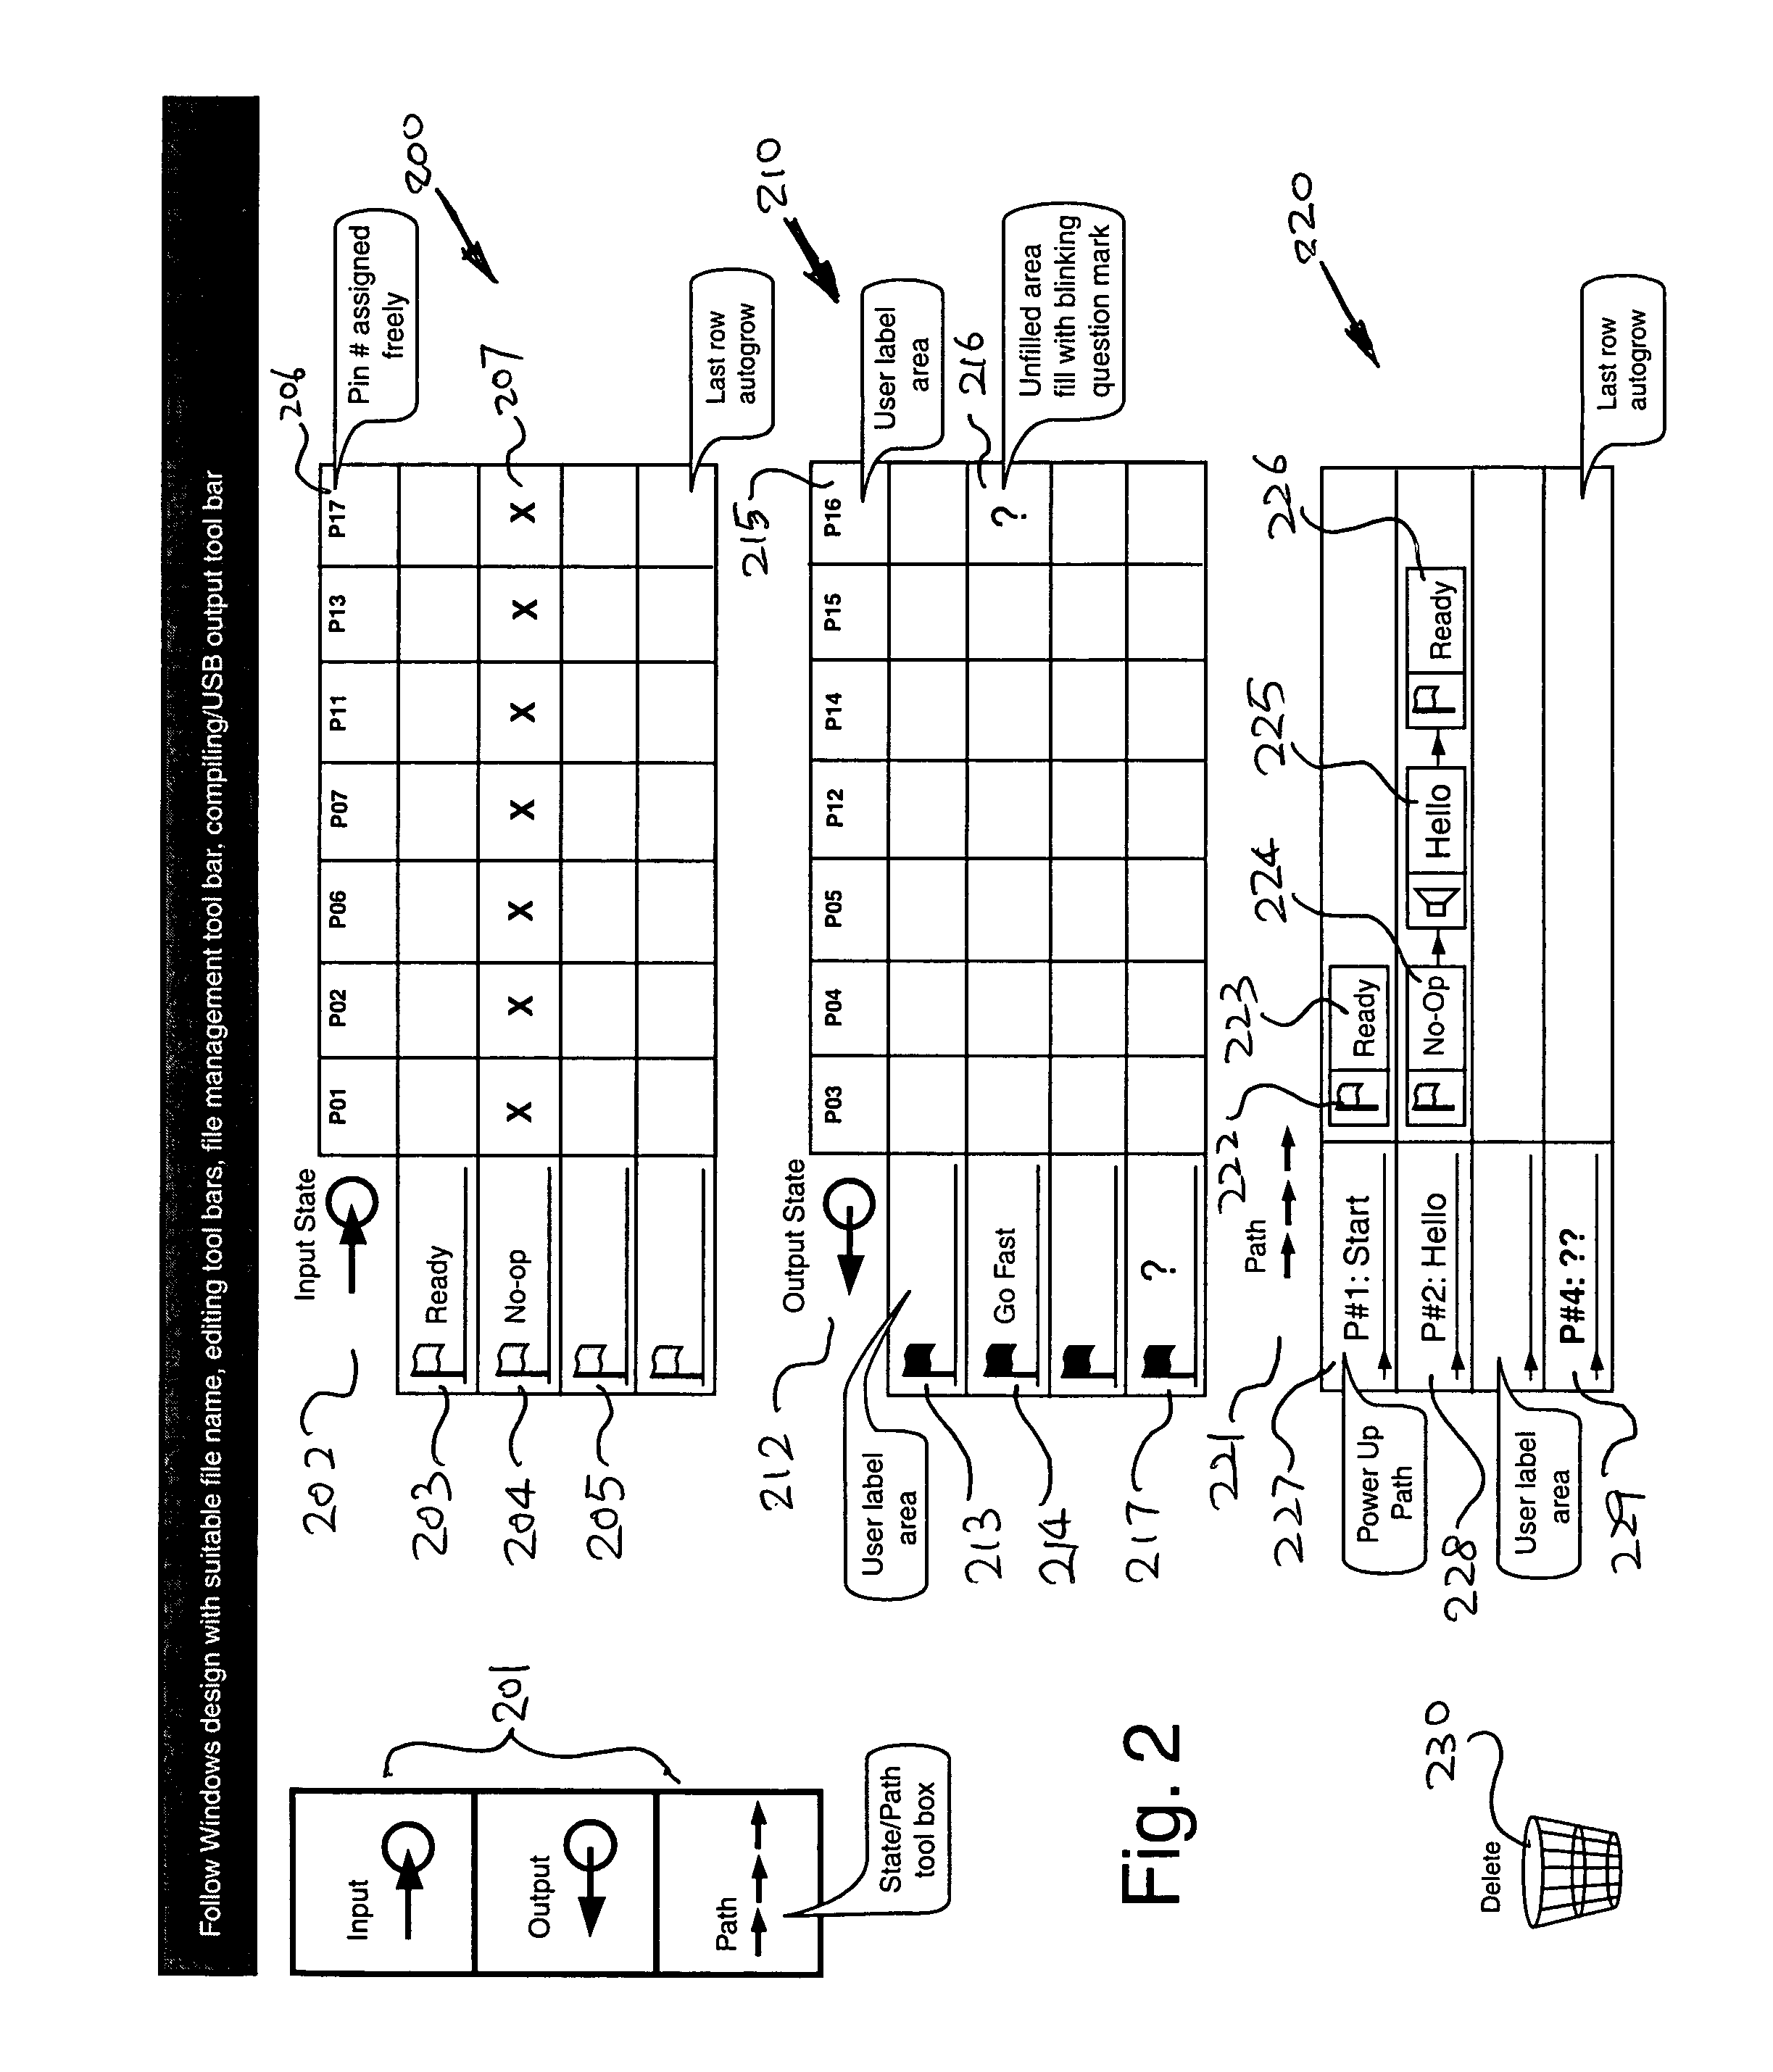 Cloud computing system configured for a consumer to program a smart phone or touch pad